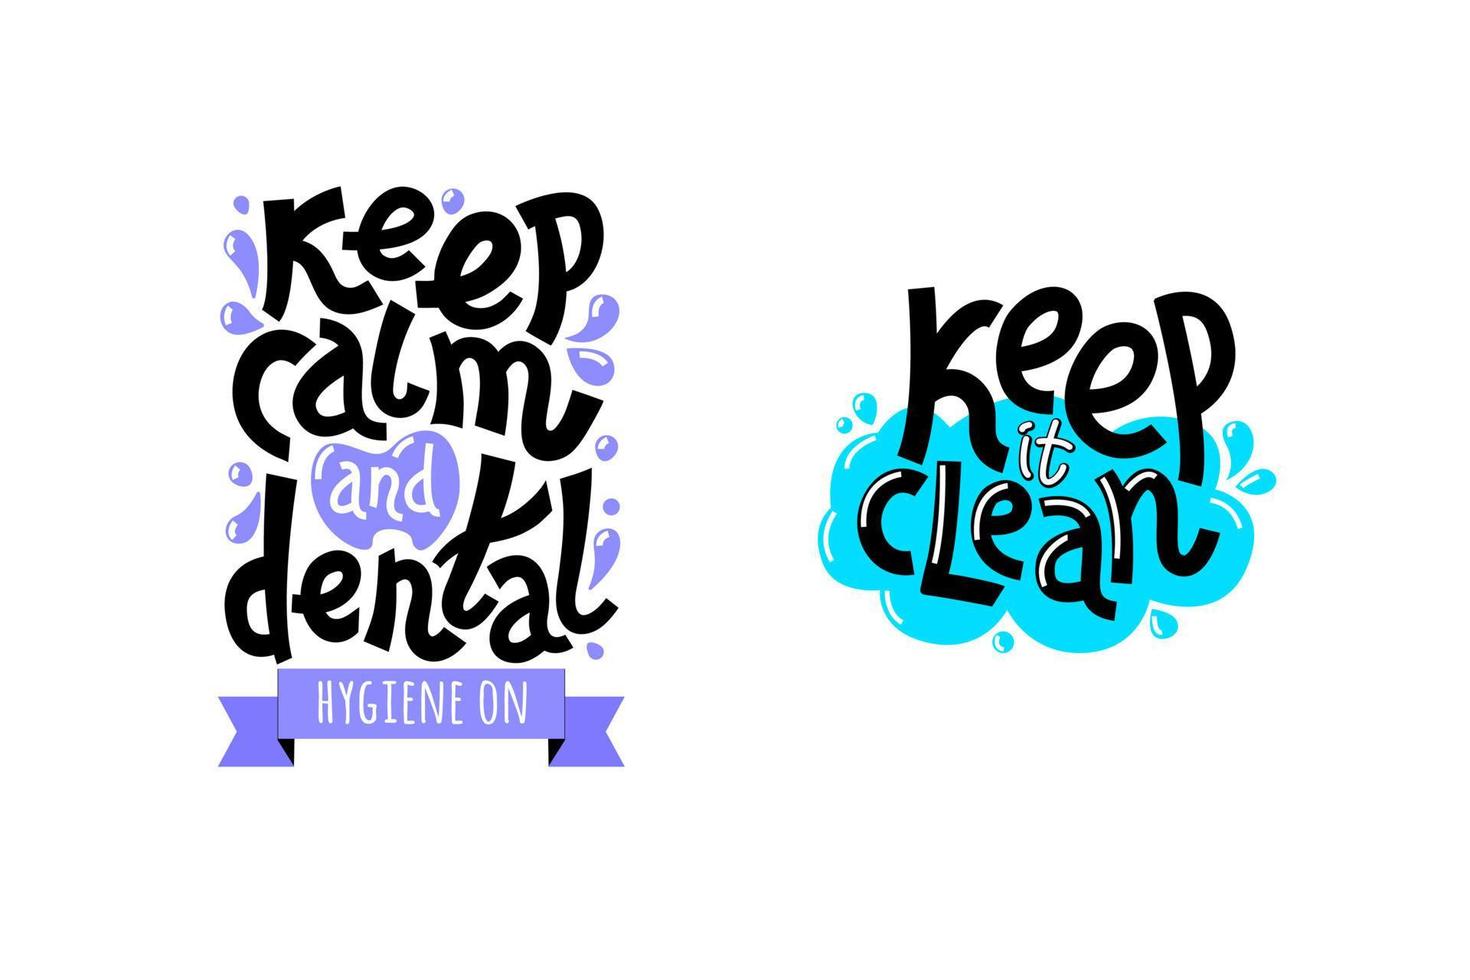 lettering inscription keep calm and dental hygiene on and keep it clean Dental care motivational quote poster. Dentist Day greeting card template. vector